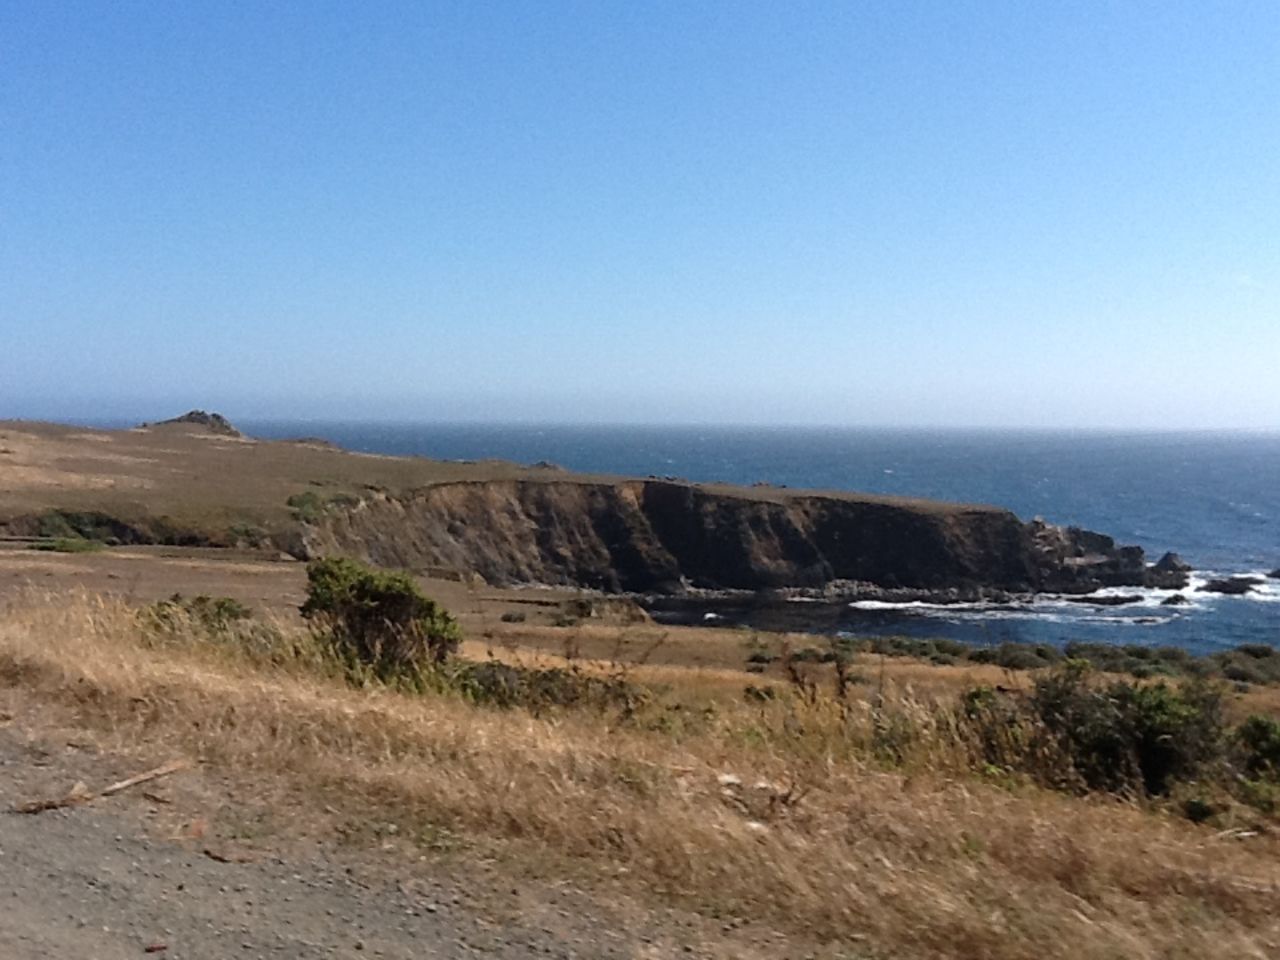 North of San Francisco, Salt Point State Park runs along the cliffs of the Pacific Ocean.